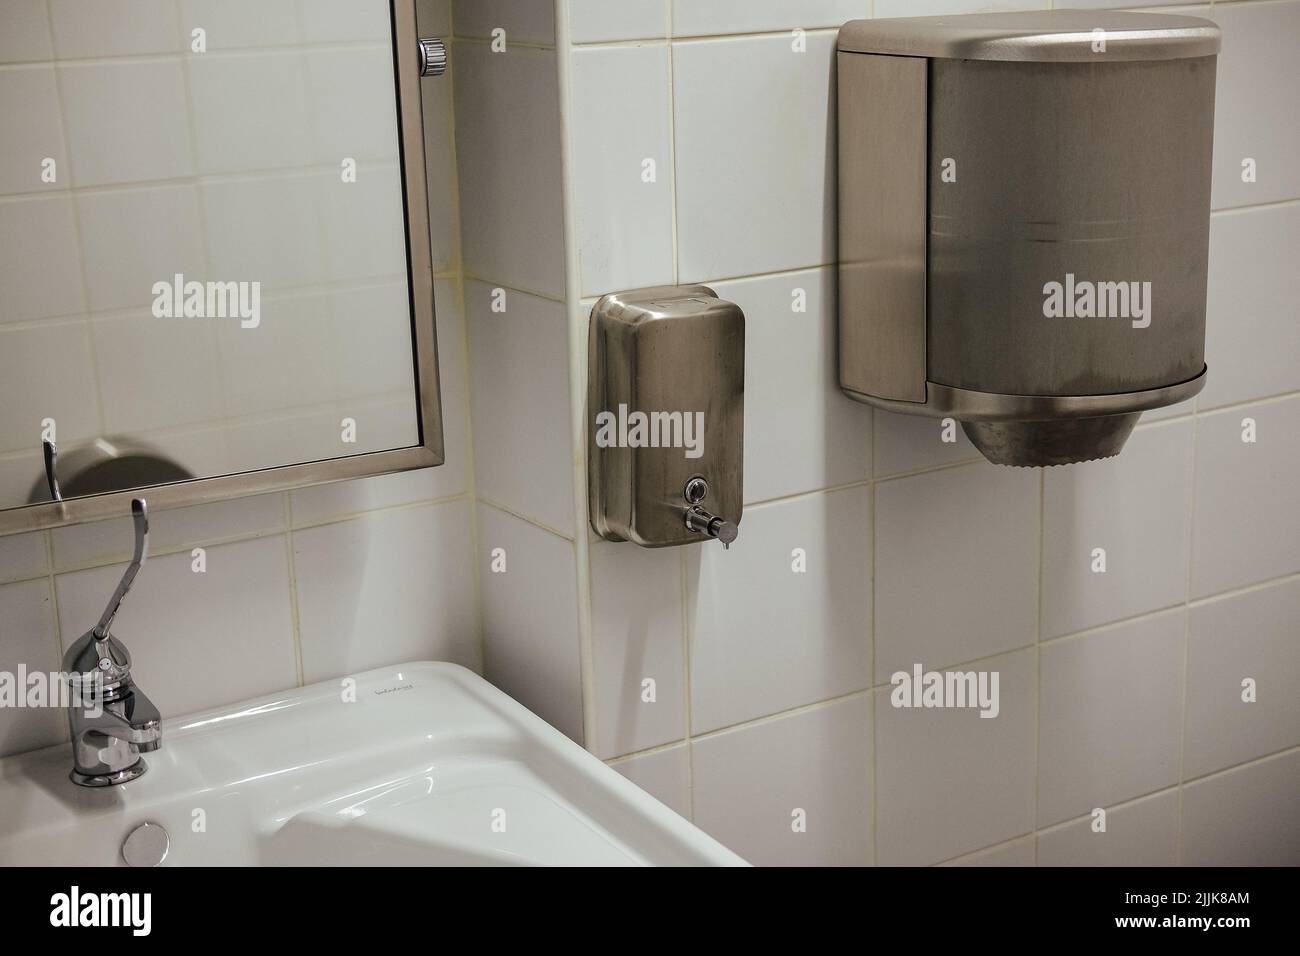 A silver soap dispenser and towel dispenser in a white tile bathroom Stock Photo